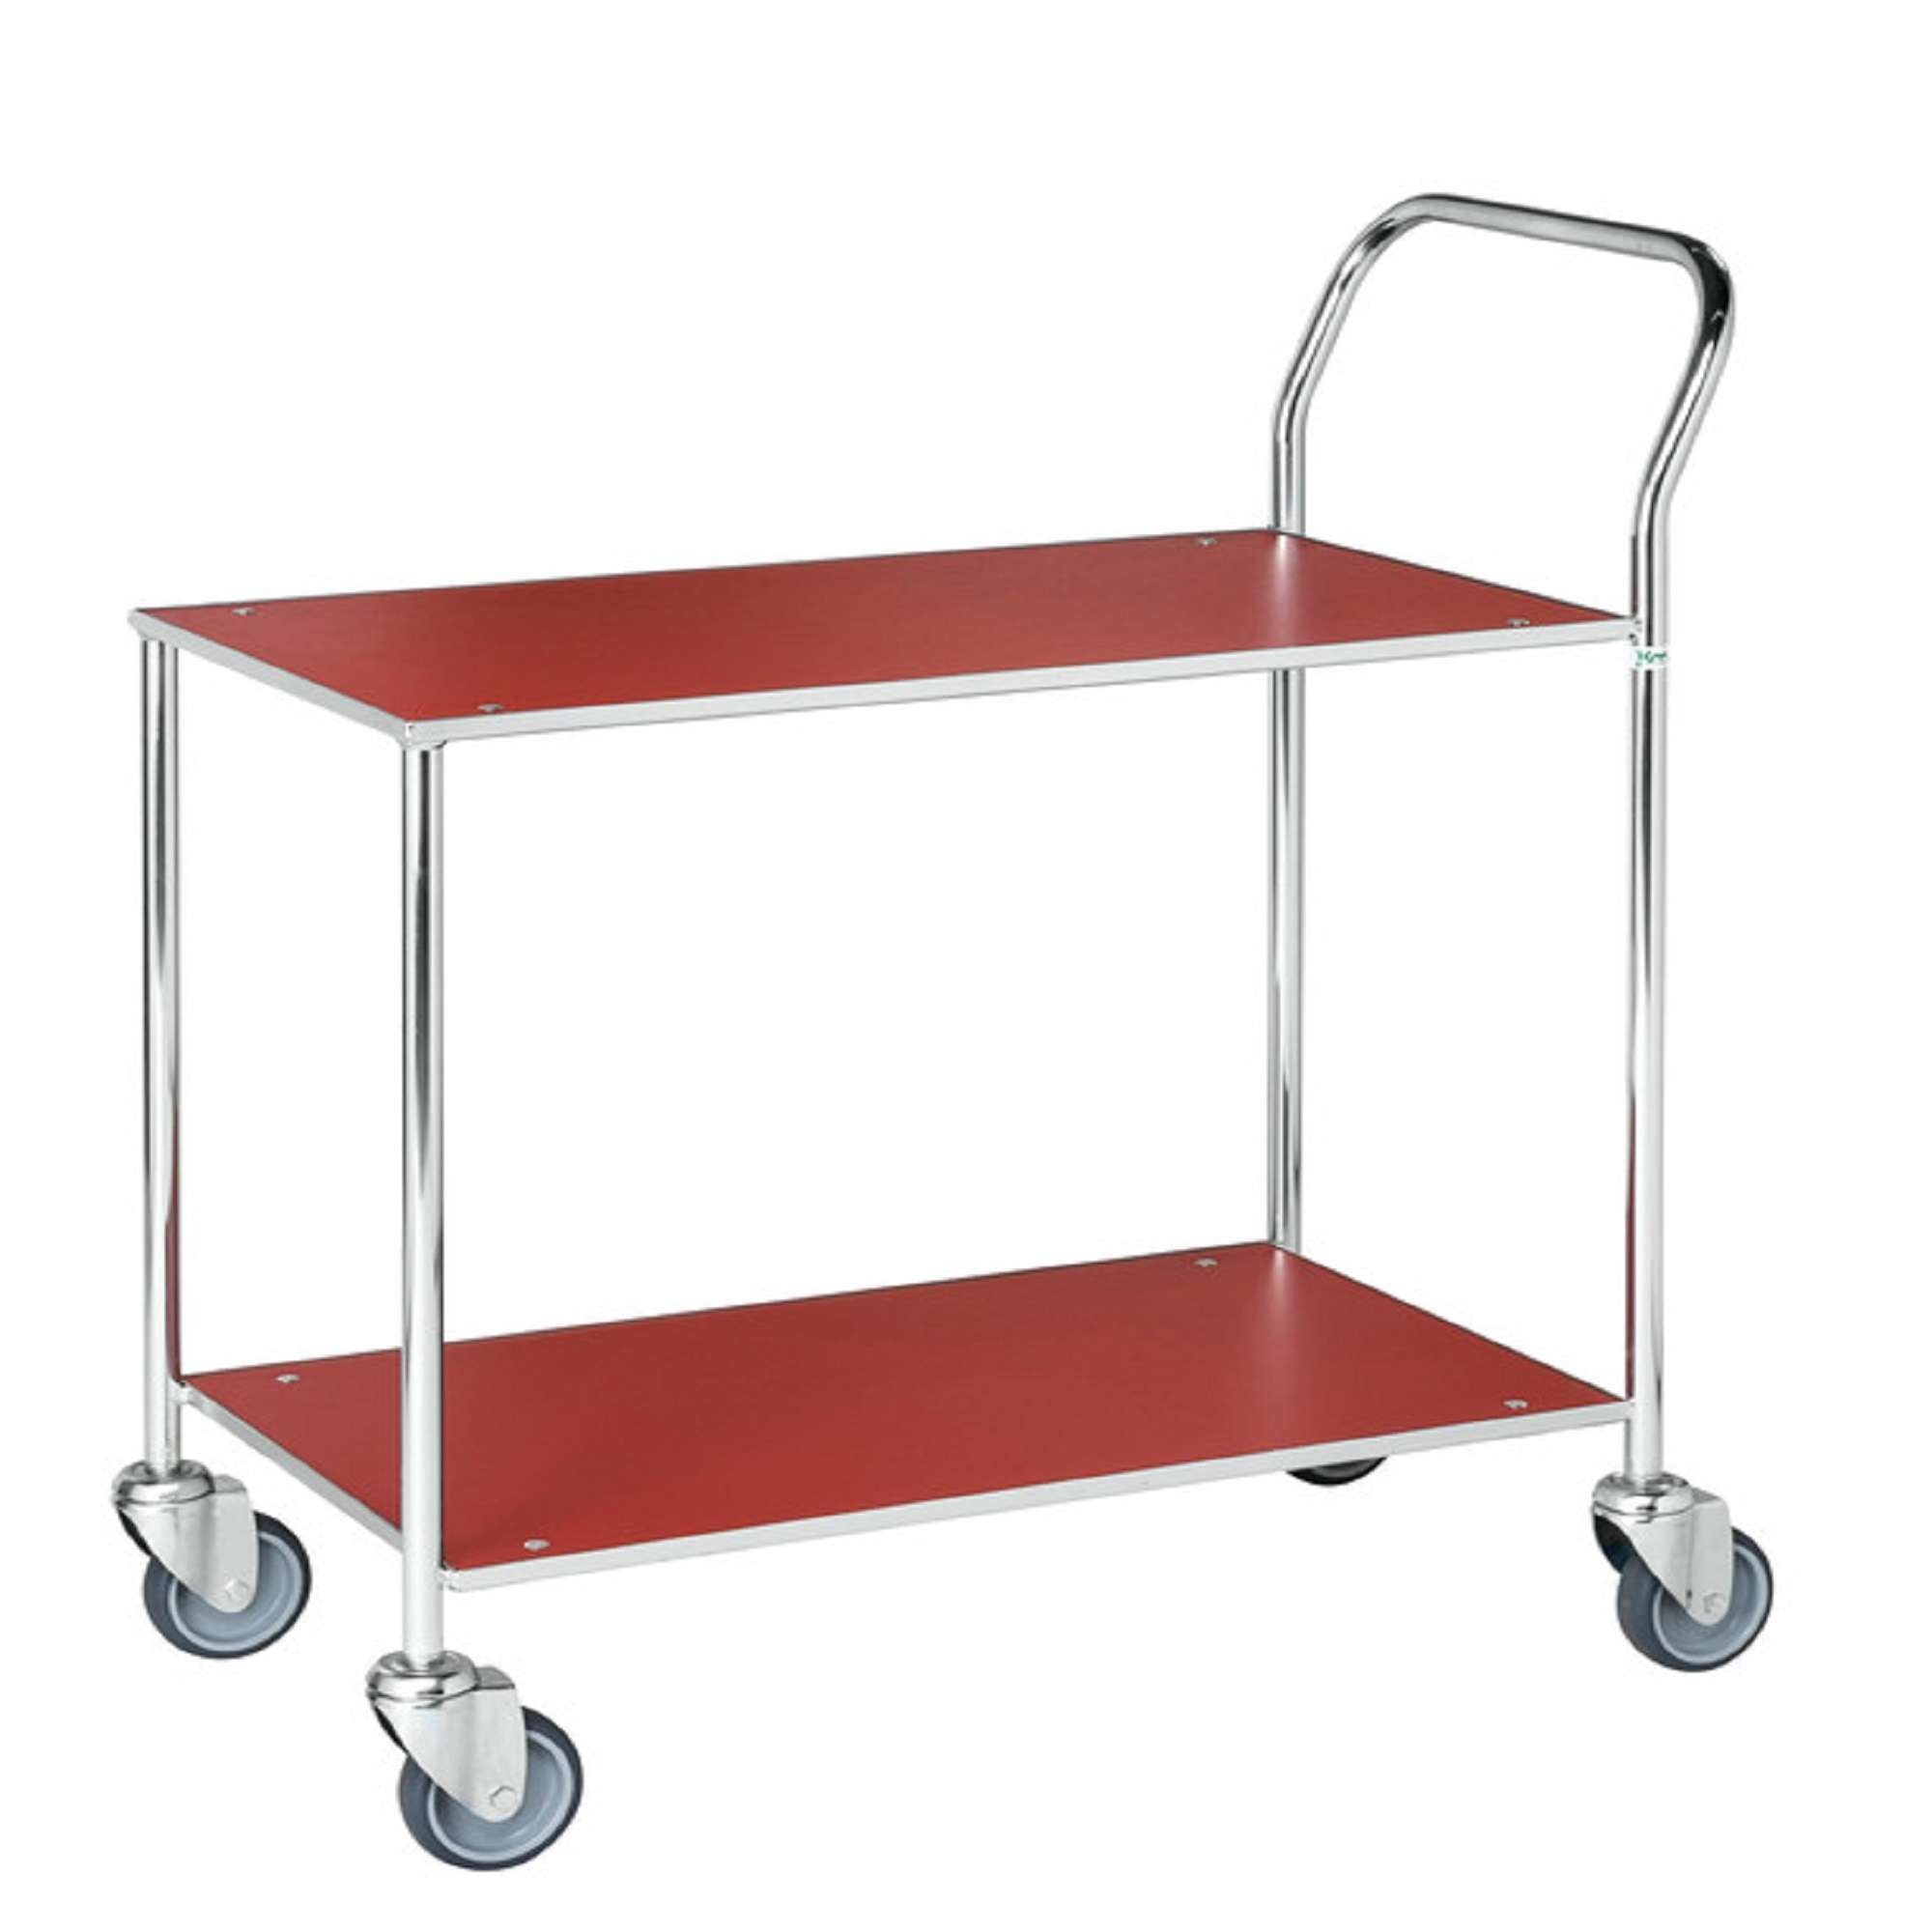 Red / Electro galvanised Table trolley with 2 shelves, LxWxH (mm) 840x430x970